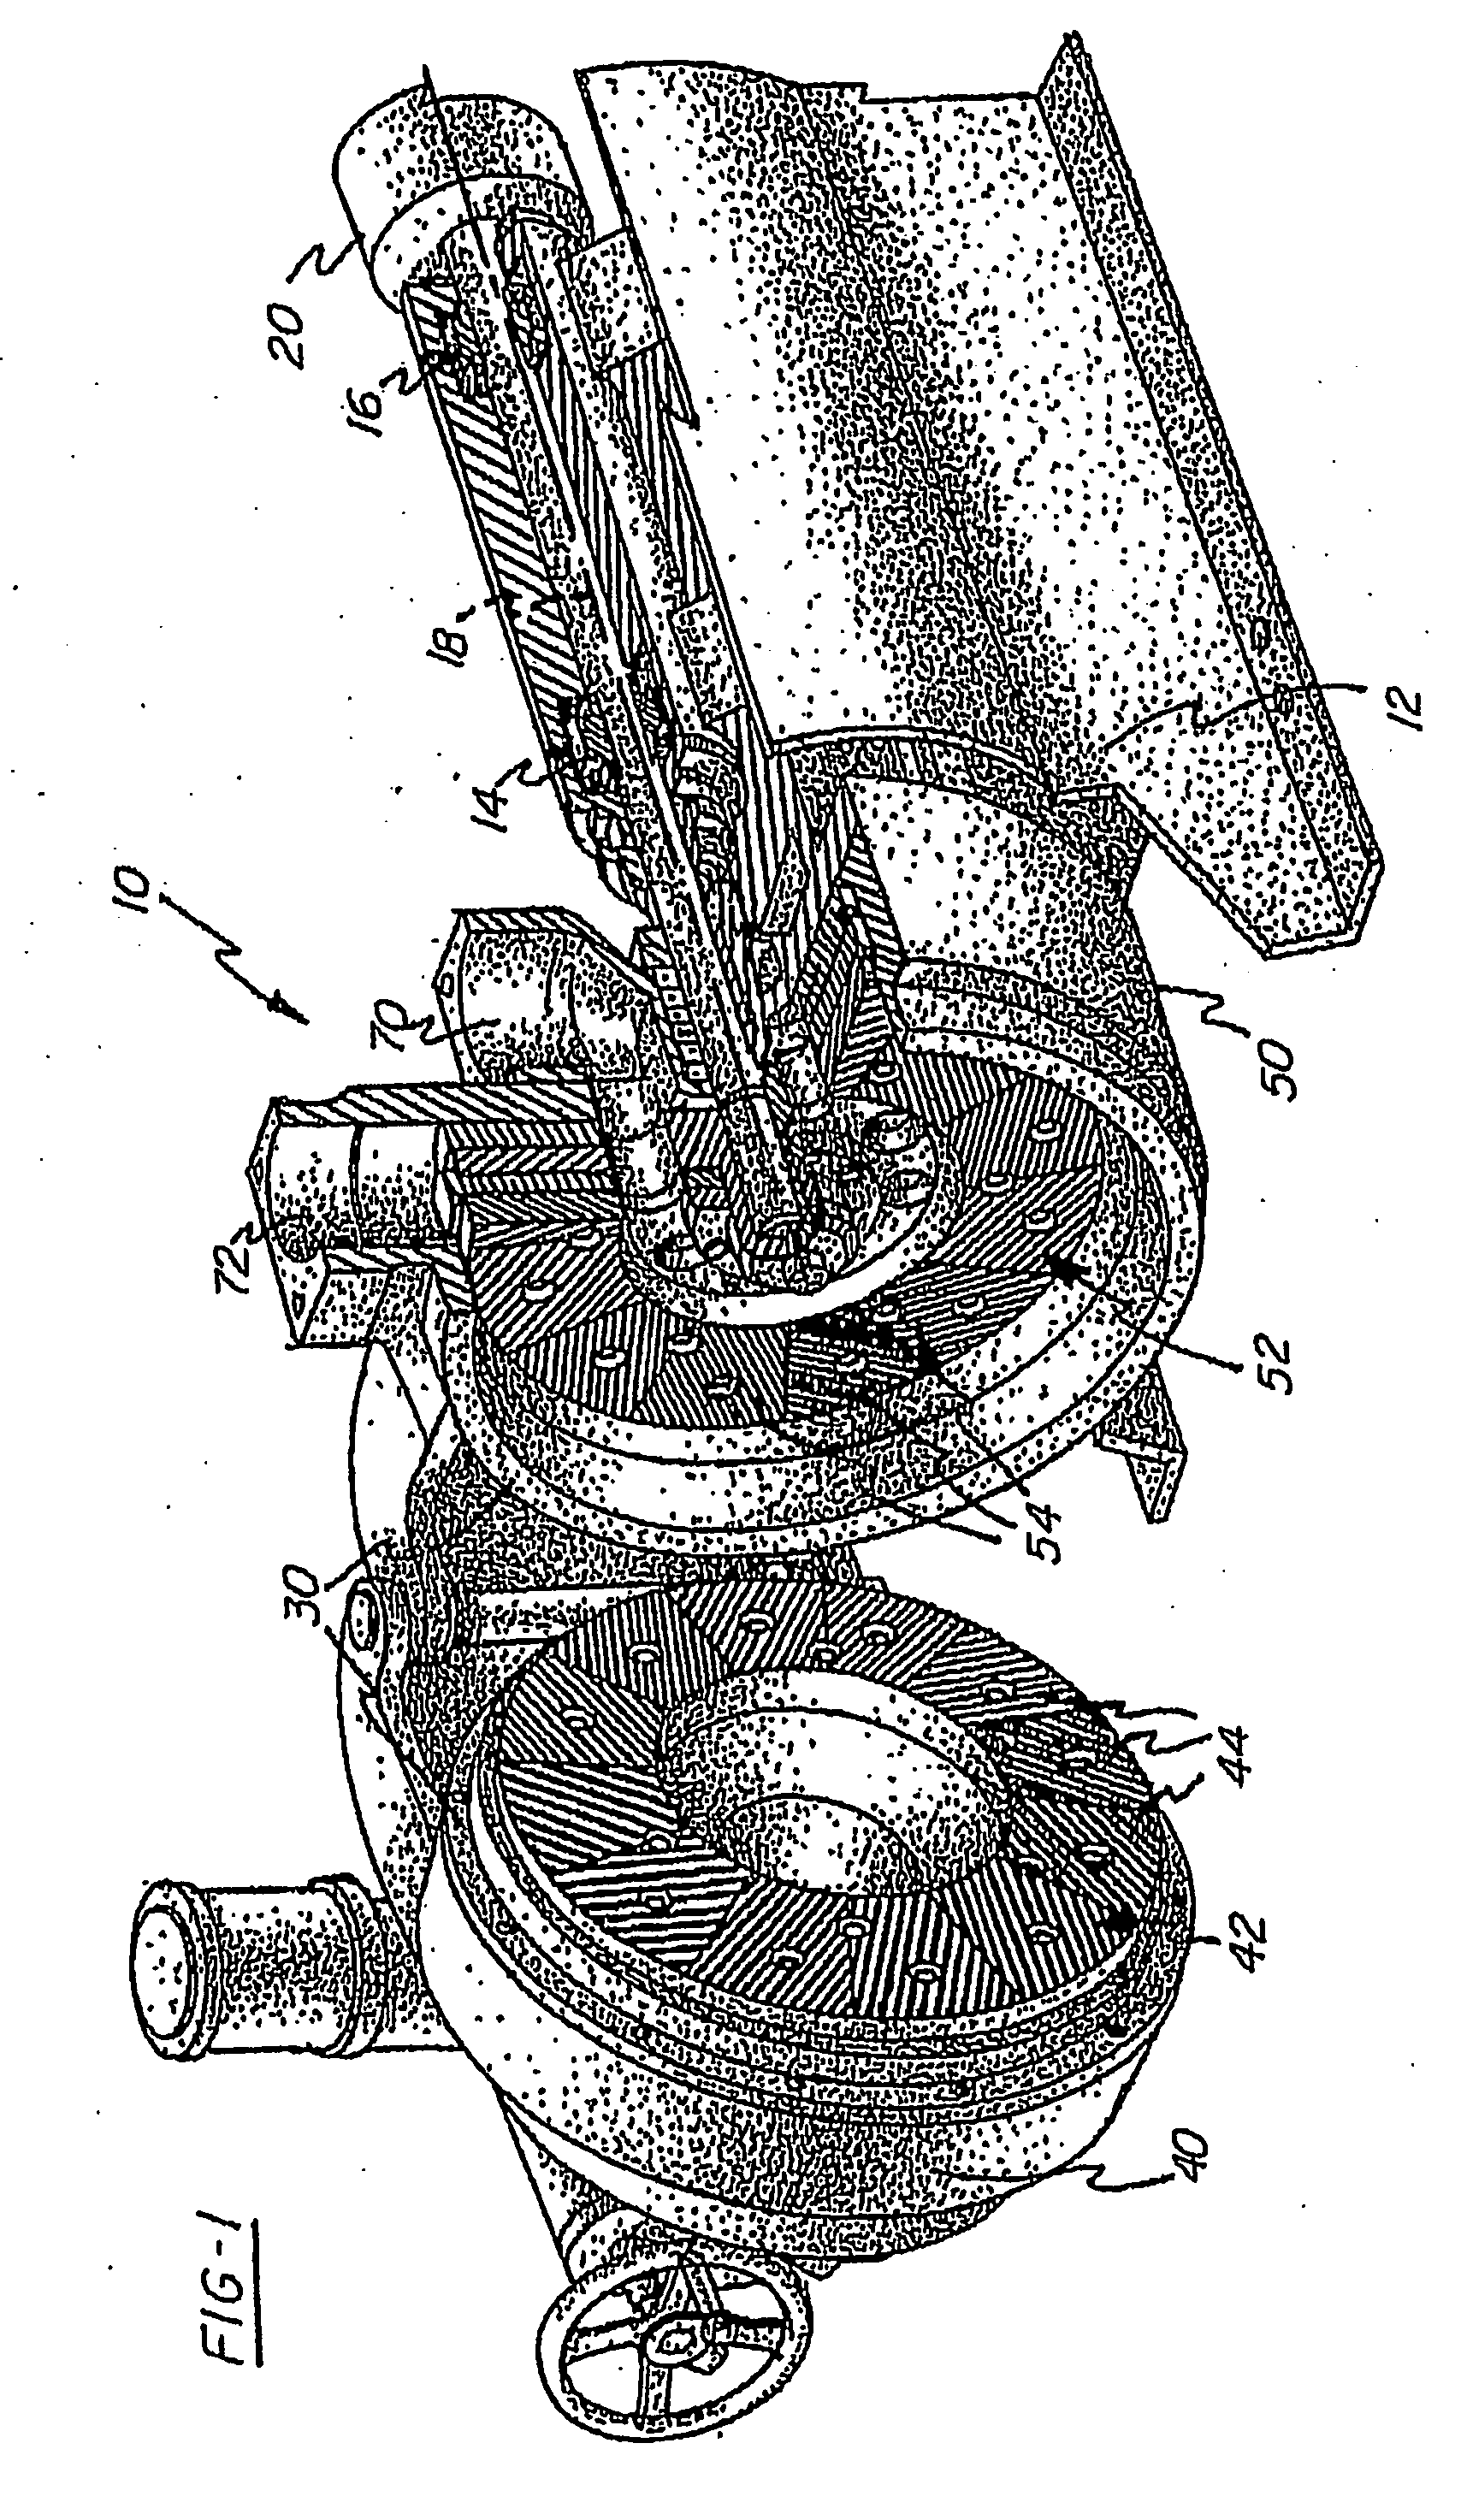 Self-aligning and actively compensating refiner stator plate system